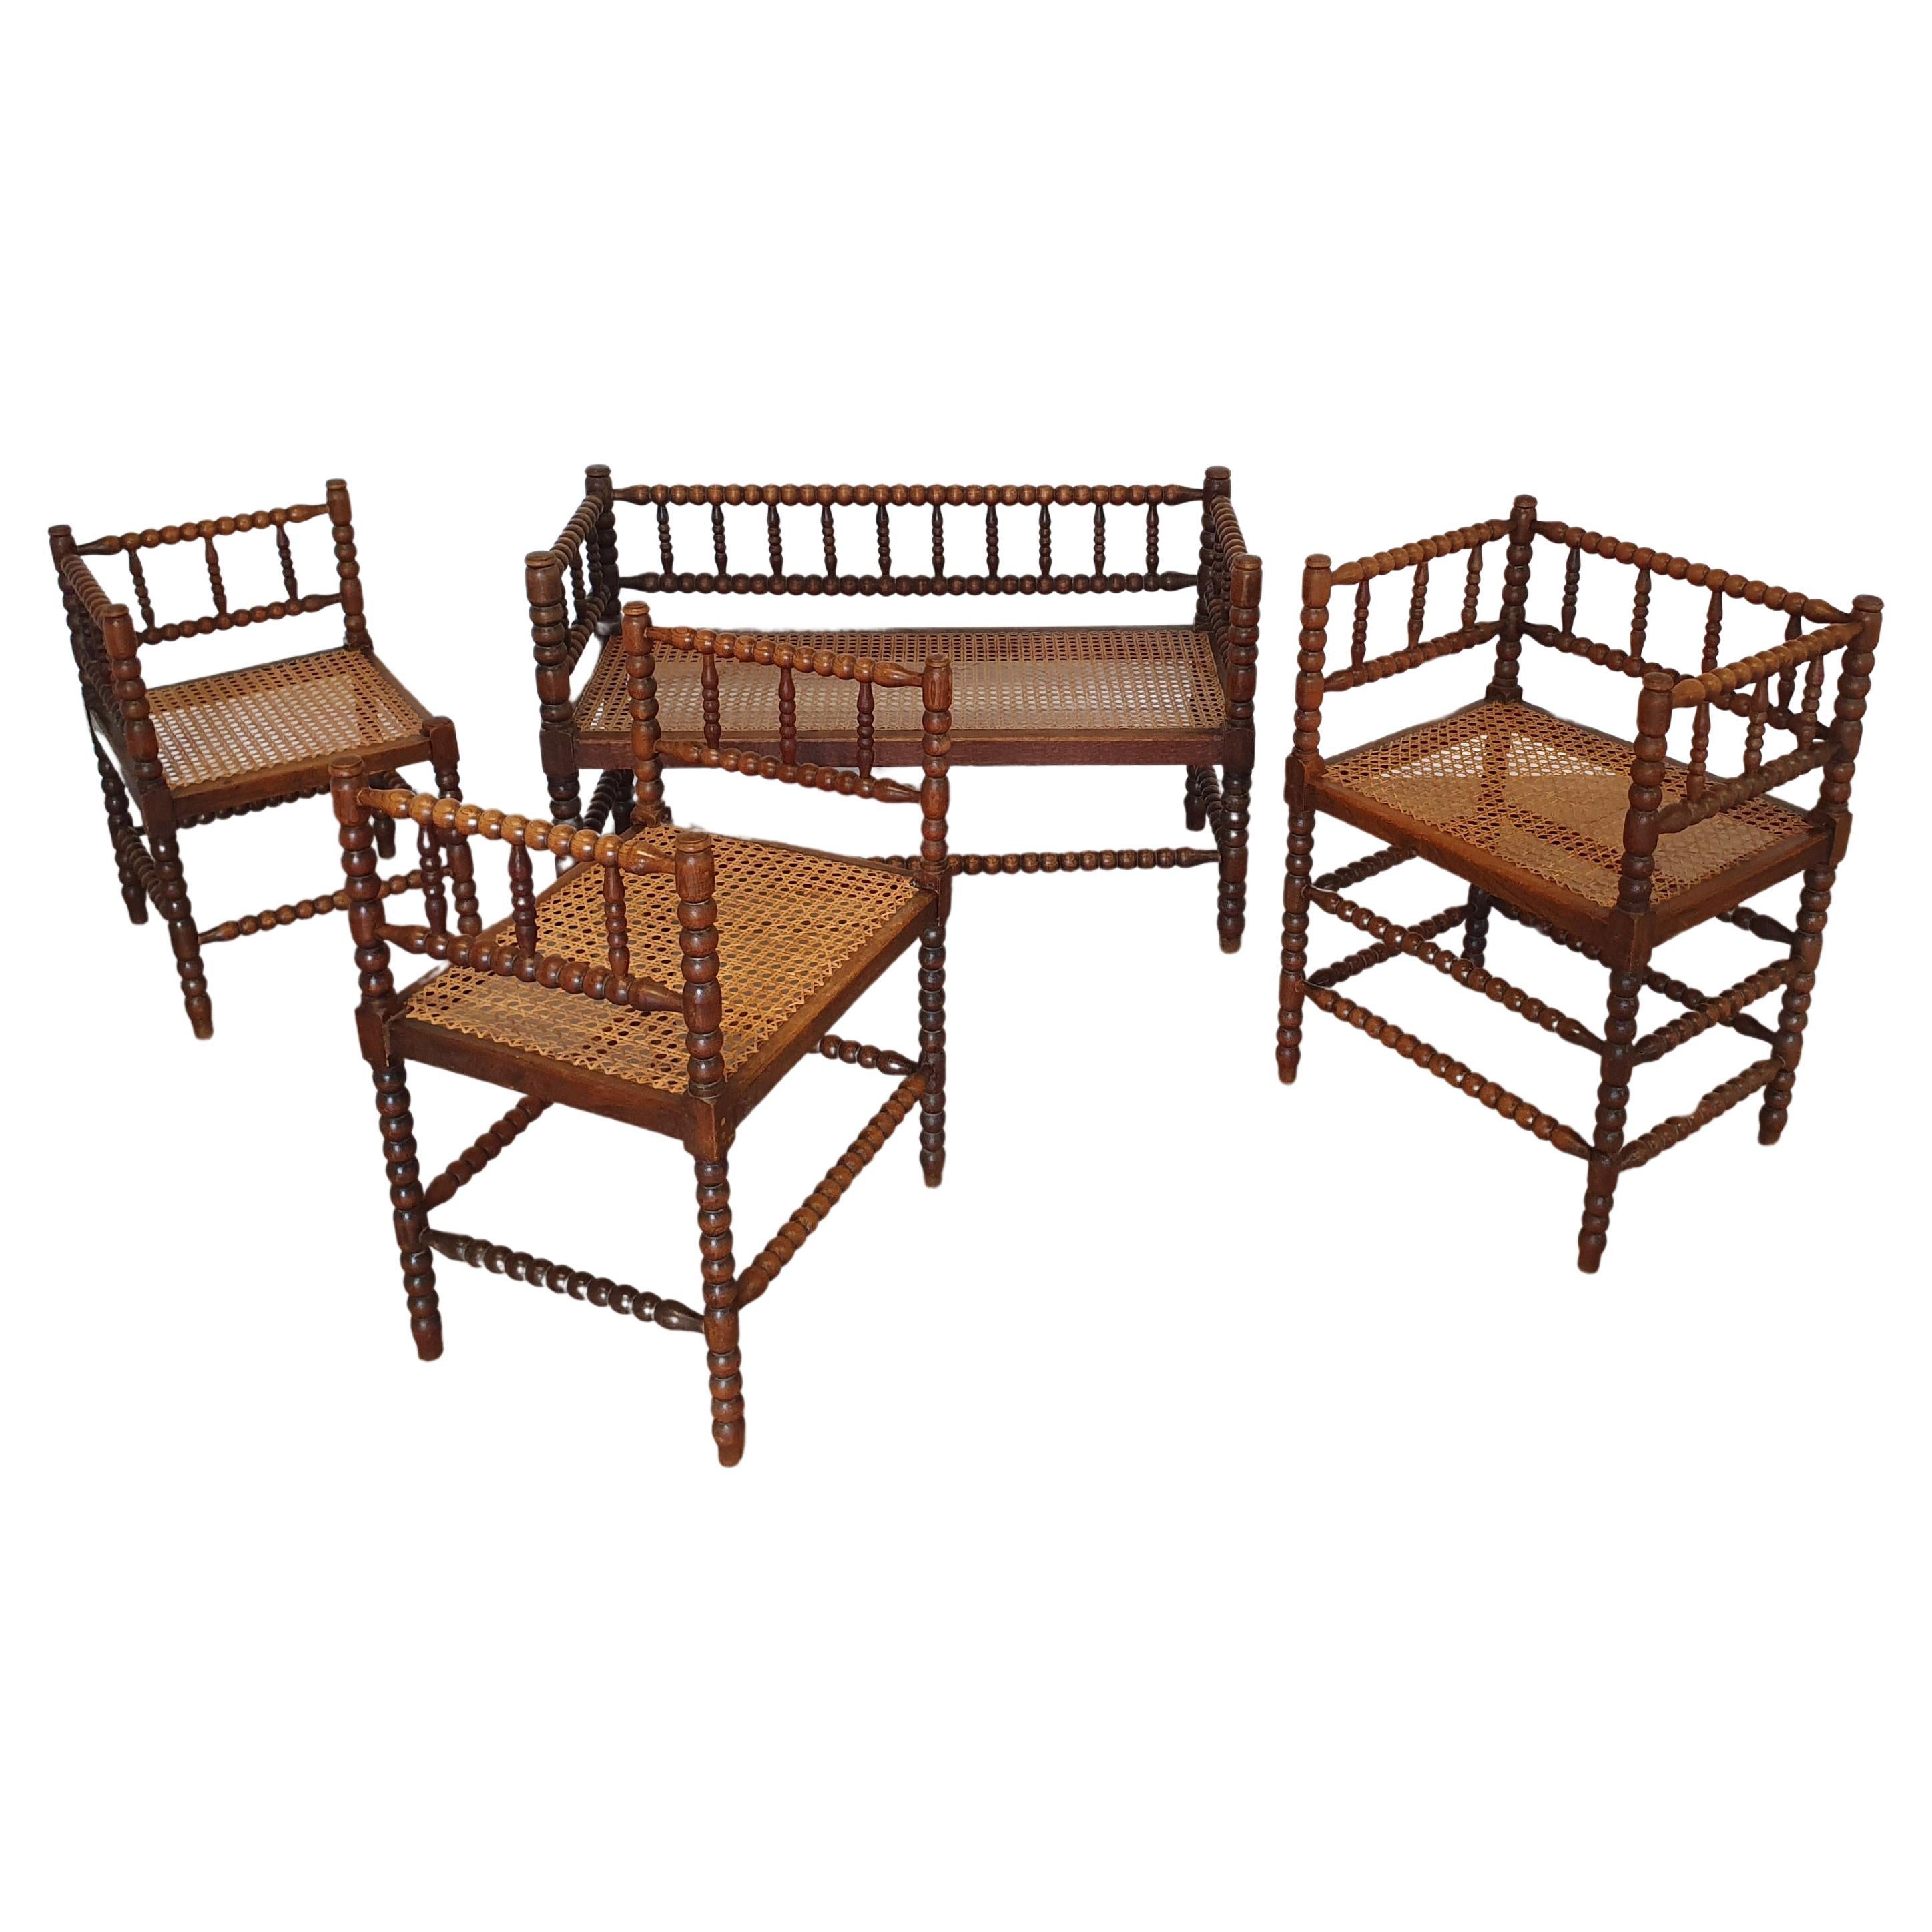 Matching webbing Bobbin family group 1 x bench , 3 x chair For Sale